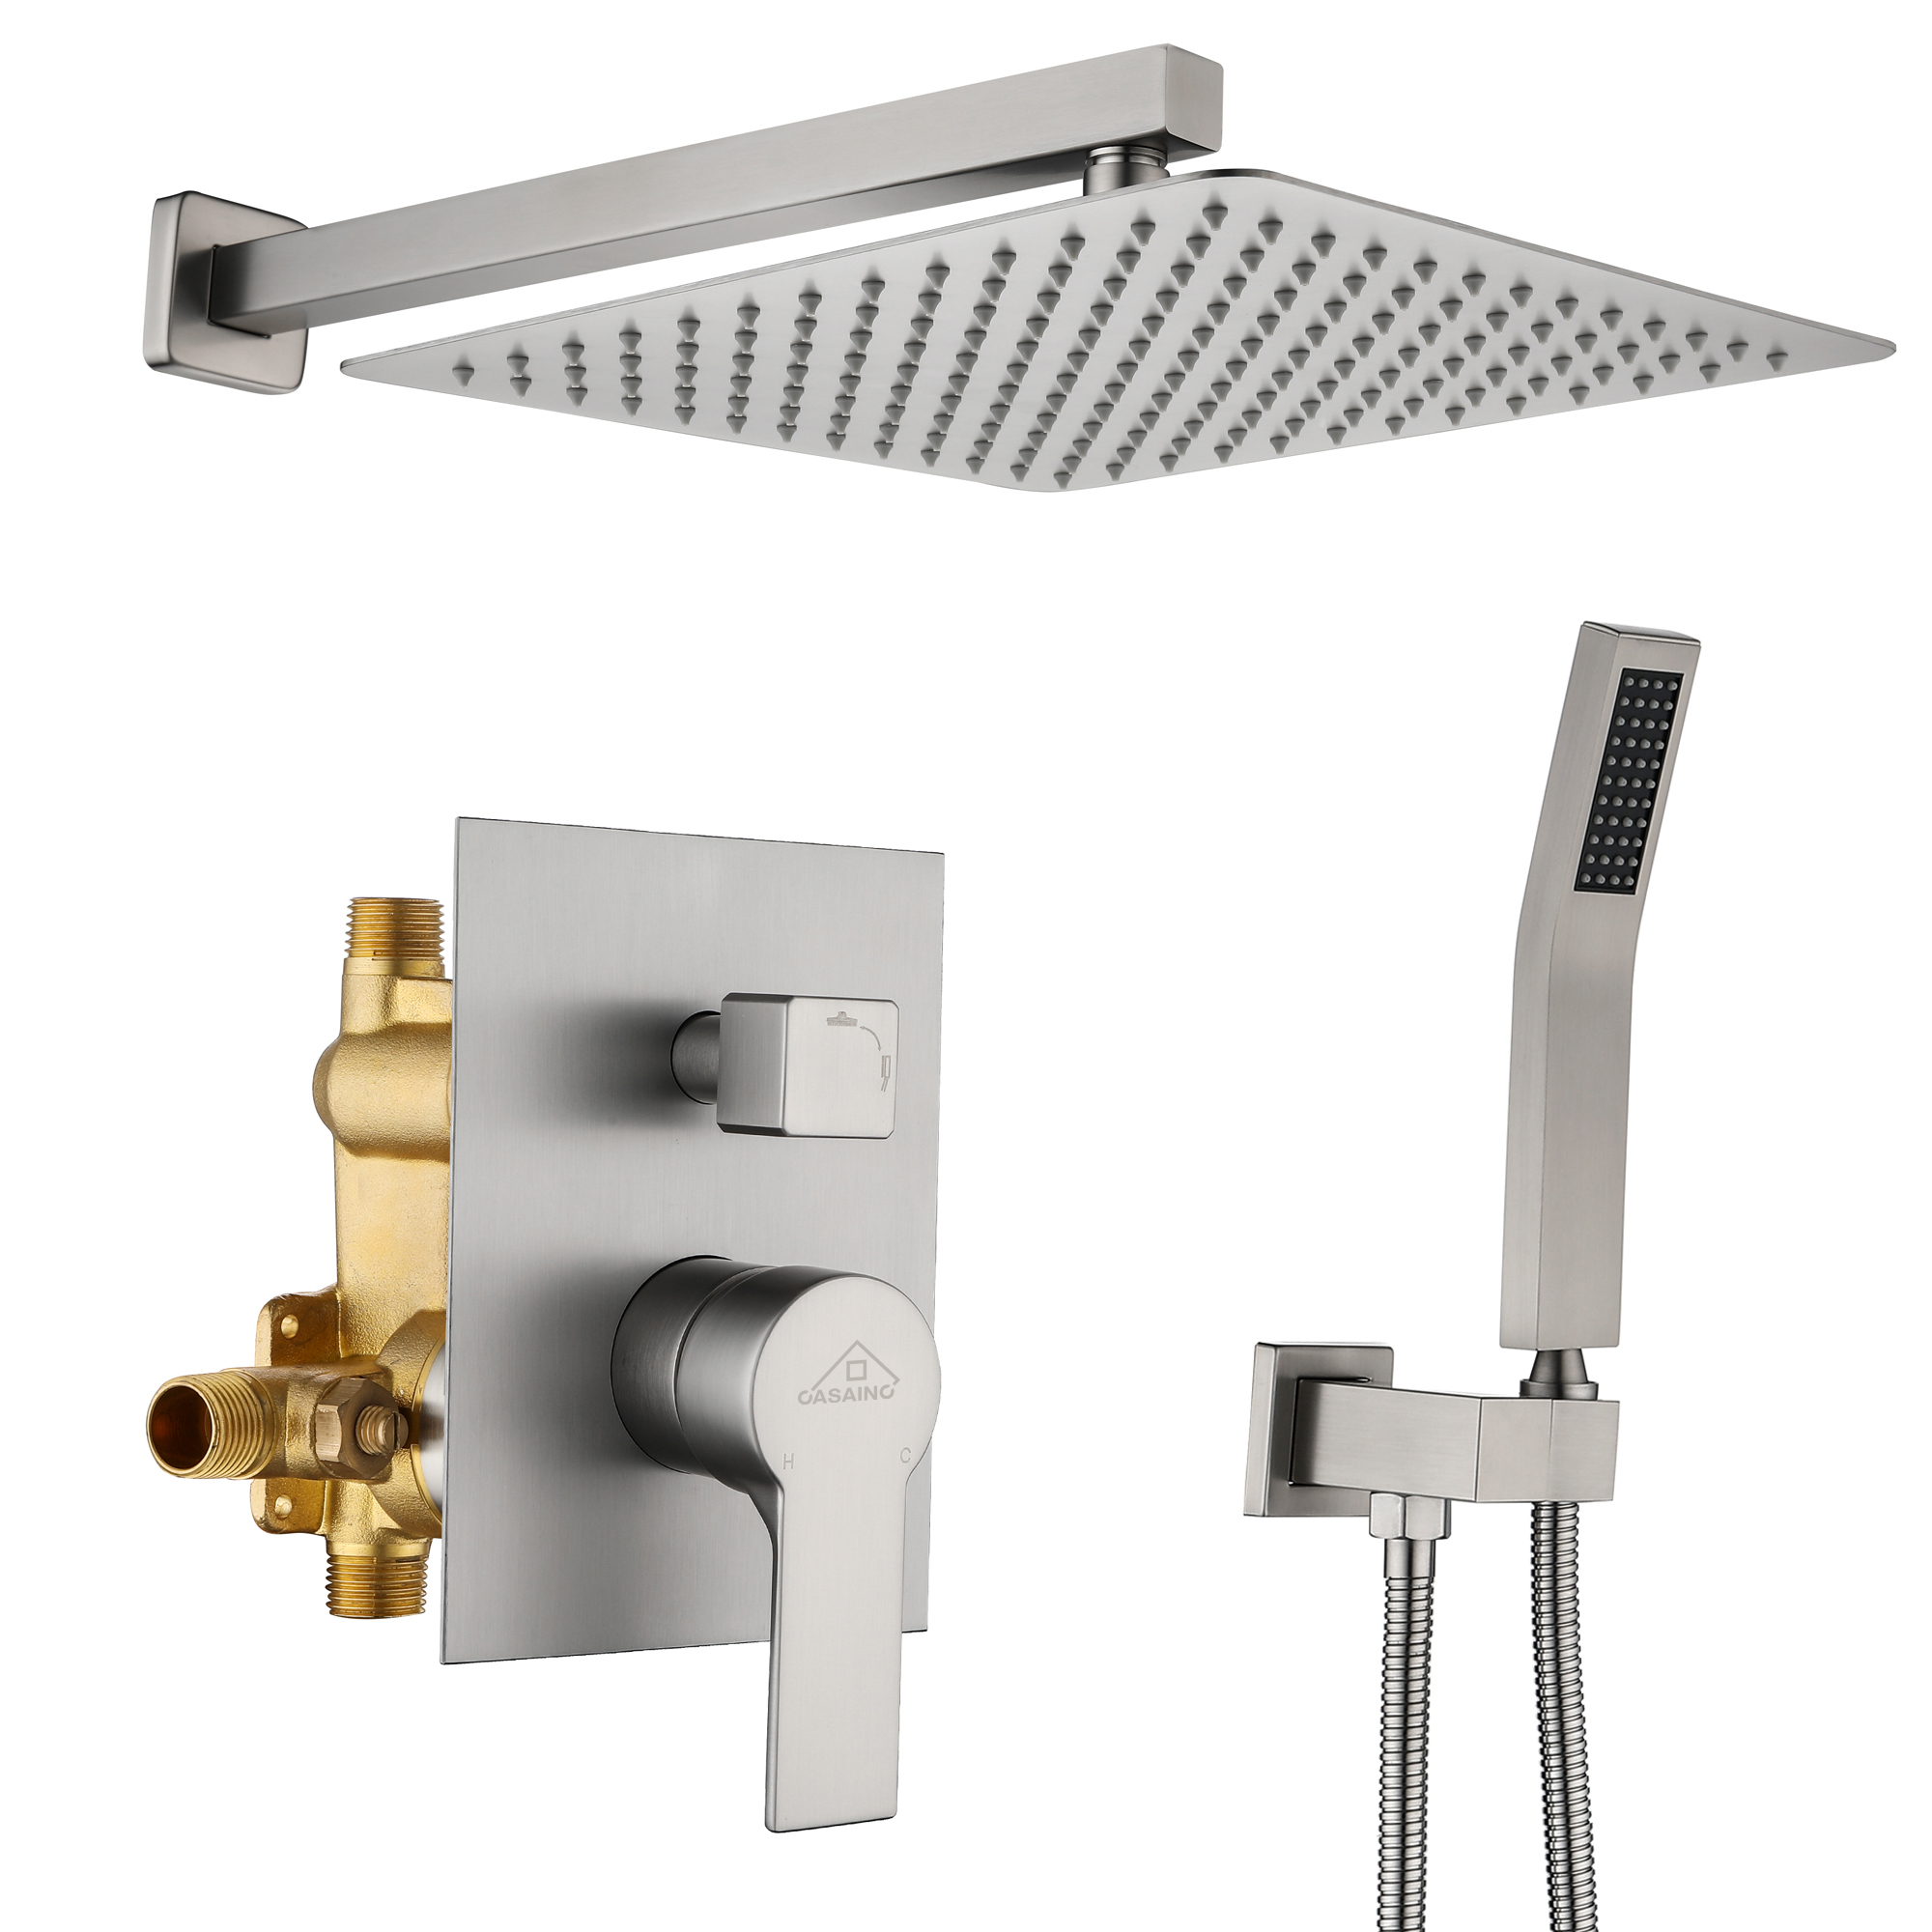 12-in Wall Mounted Shower System with Rough-In Valve Body and Trim (Brushed Nickel) suit for different bathroom size and styles